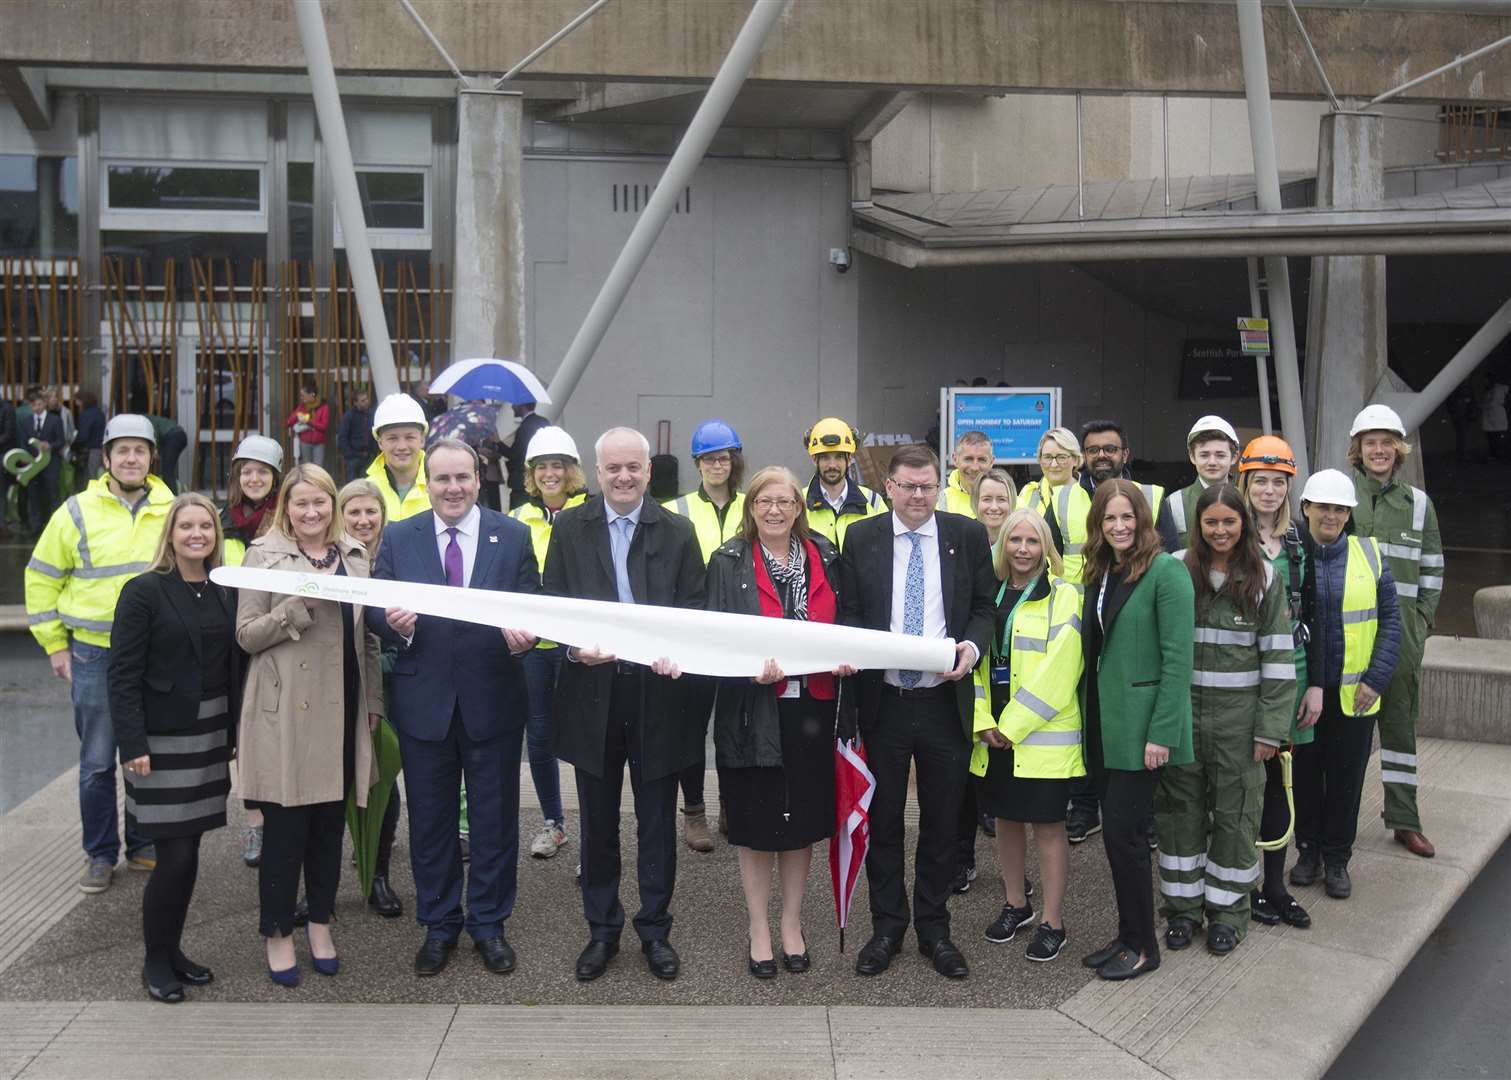 Scottish Renewables chief executive Claire Mack; ScottishPower Renewables chief executive Lindsay McQuade; Scotland’s energy minister Paul Wheelhouse; MSP Mark Ruskell; MSP Elaine Smith; MSP Colin Smyth; Jacqueline Aitken, of Senvion; and Susie Lind, of EDF Renewables join renewables workers at the Scottish Parliament during Onshore Wind Week. Picture: Michael McGurk